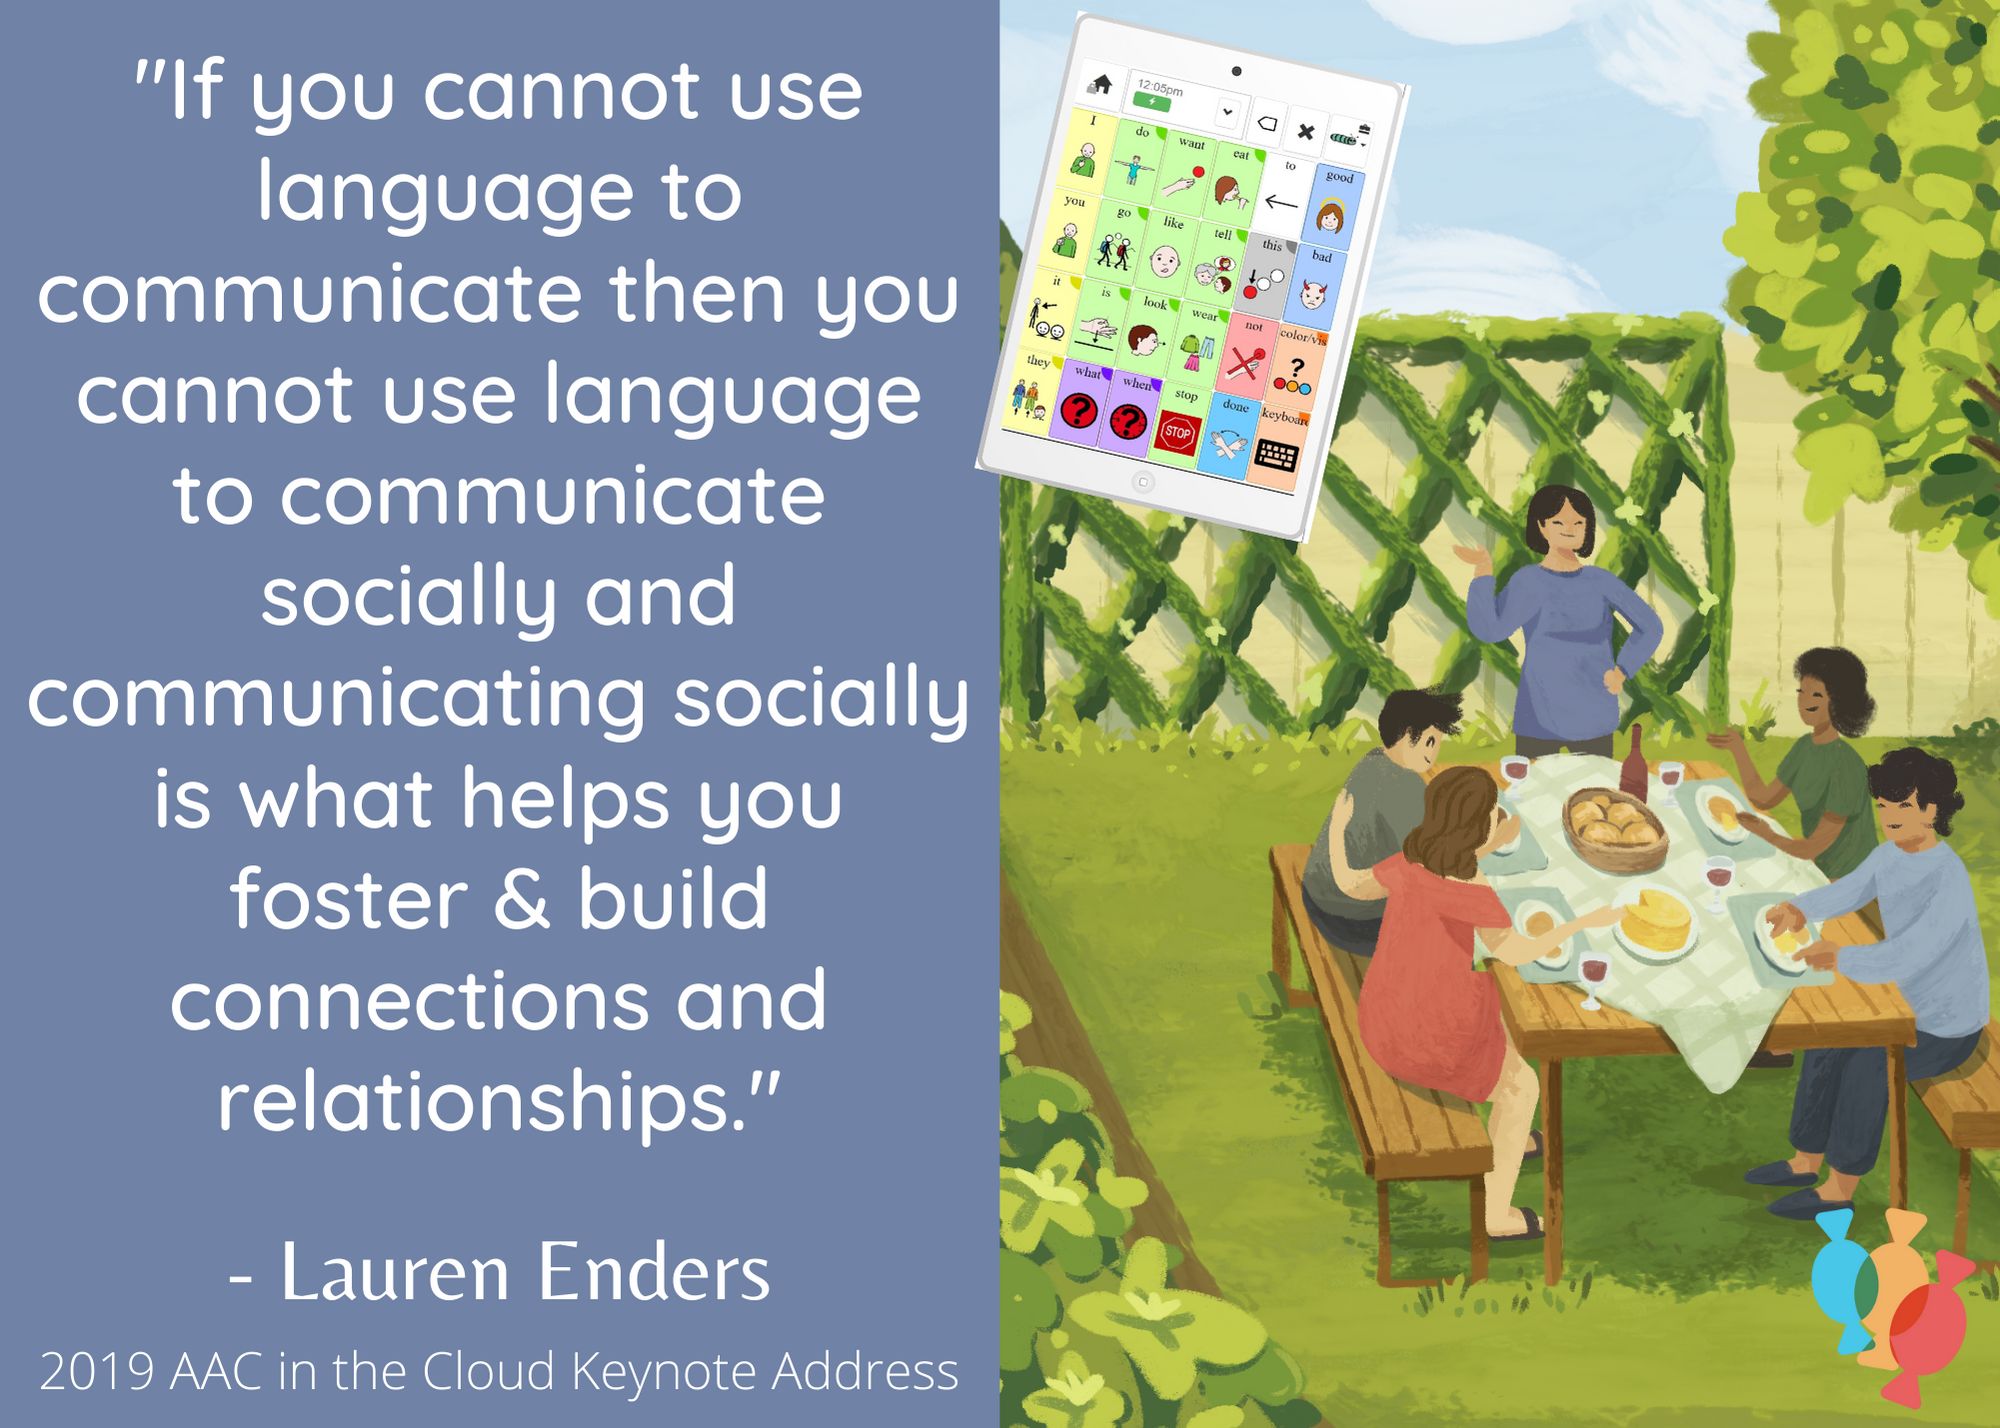 Graphic reads: If you cannot use language to communicate then you cannot use langauge to communicate socially and communicating socially is what helps you foster and build connections and relationships.  -Lauren Enders, 2019 AAC in the Cloud Keynot Address.  Next to the quote is a graphic of a family in a yard sitting at a picnic table eating together.  There is an AAC device displayed.  The CoughDrop logo is in the bottom right corner of the image.